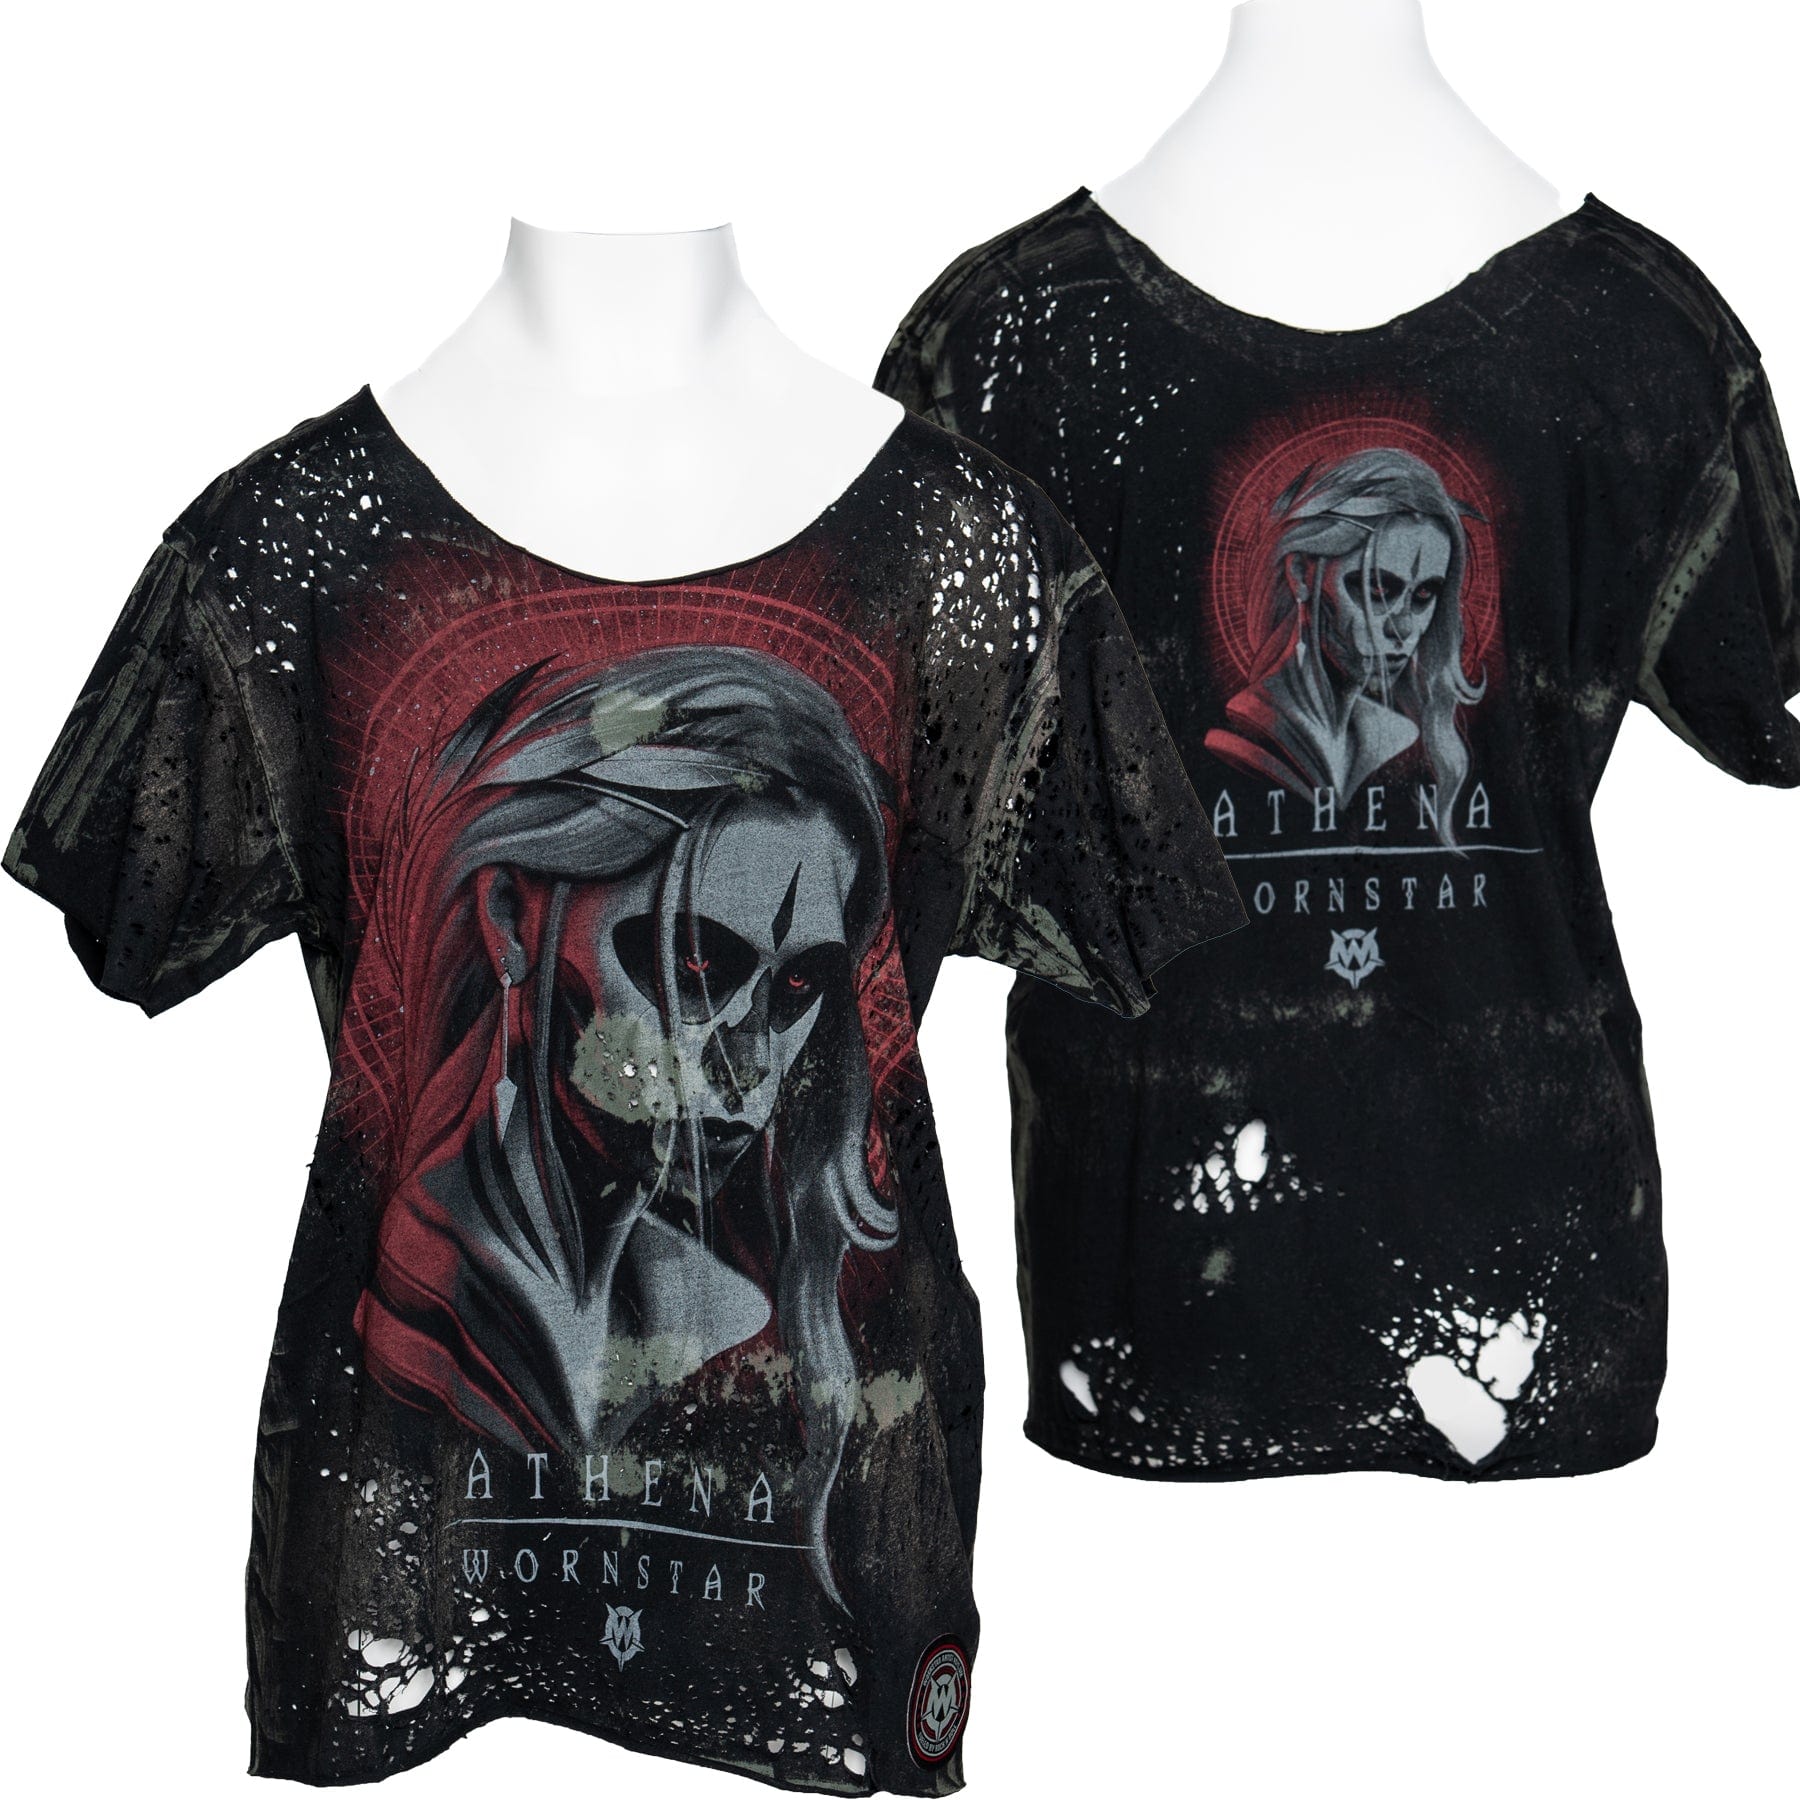 Sirens Collection T-Shirt One Size Wornstar Custom -  Destroyed Cut Tee - Athena OS Ready to Ship